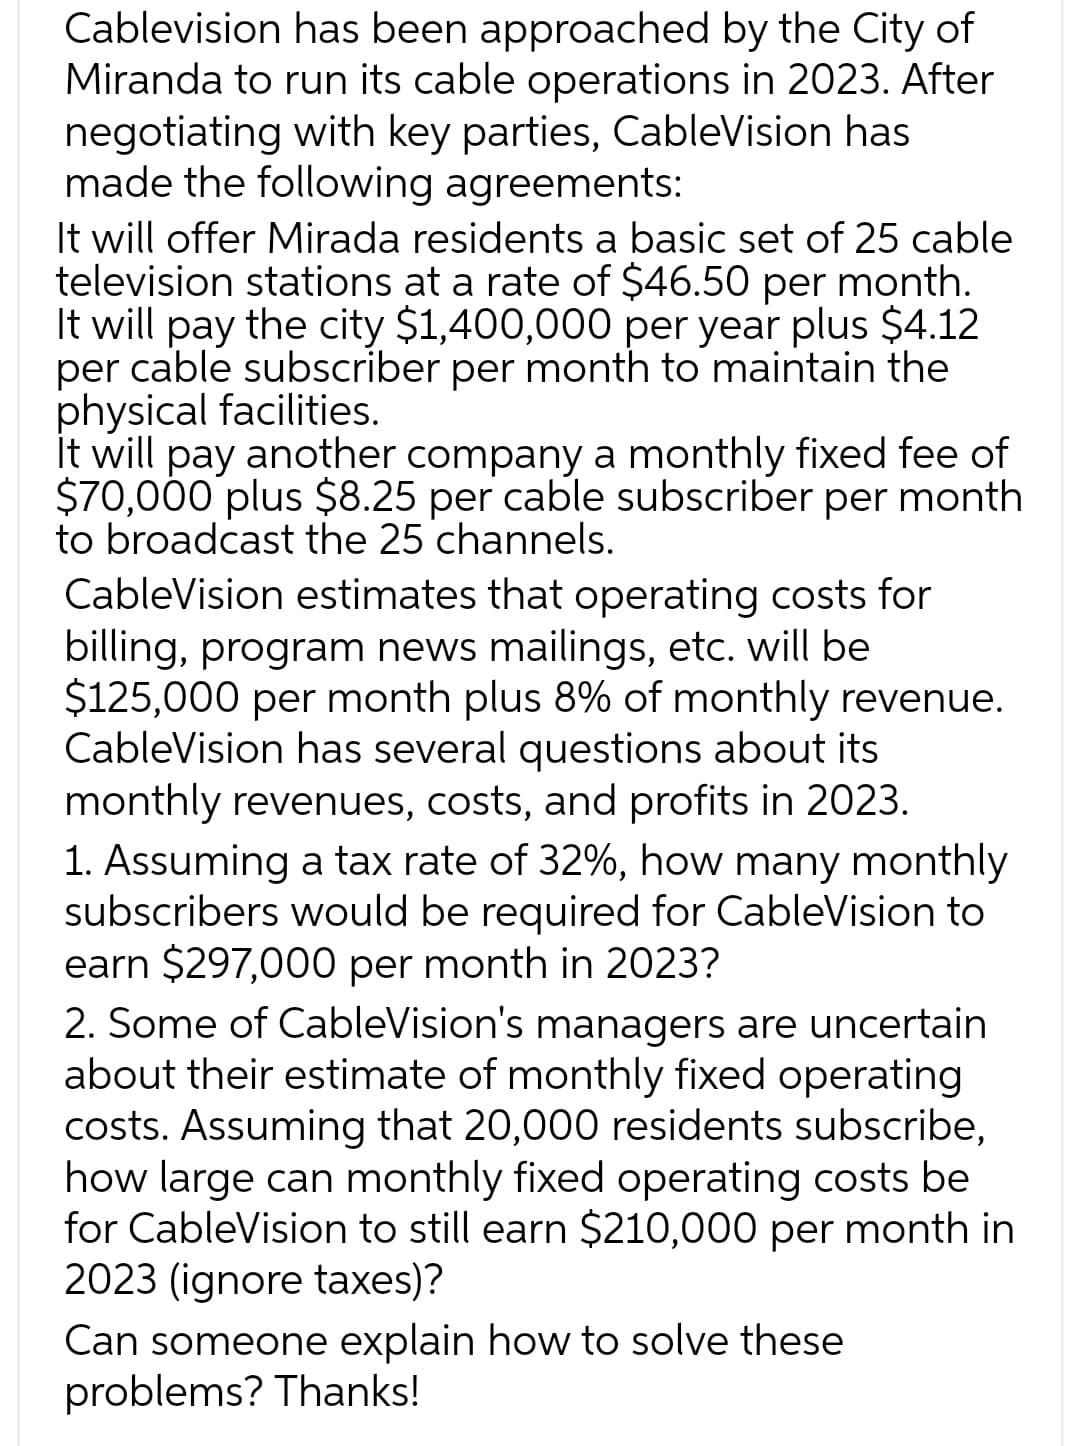 Cablevision has been approached by the City of
Miranda to run its cable operations in 2023. After
negotiating with key parties, CableVision has
made the following agreements:
It will offer Mirada residents a basic set of 25 cable
television stations at a rate of $46.50 per month.
It will pay the city $1,400,000 per year plus $4.12
per cable subscriber per month to maintain the
physical facilities.
It will pay another company a monthly fixed fee of
$70,000 plus $8.25 per cable subscriber per month
to broadcast the 25 channels.
CableVision estimates that operating costs for
billing, program news mailings, etc. will be
$125,000 per month plus 8% of monthly revenue.
CableVision has several questions about its
monthly revenues, costs, and profits in 2023.
1. Assuming a tax rate of 32%, how many monthly
subscribers would be required for CableVision to
earn $297,000 per month in 2023?
2. Some of CableVision's managers are uncertain
about their estimate of monthly fixed operating
costs. Assuming that 20,000 residents subscribe,
how large can monthly fixed operating costs be
for CableVision to still earn $210,000 per month in
2023 (ignore taxes)?
Can someone explain how to solve these
problems? Thanks!